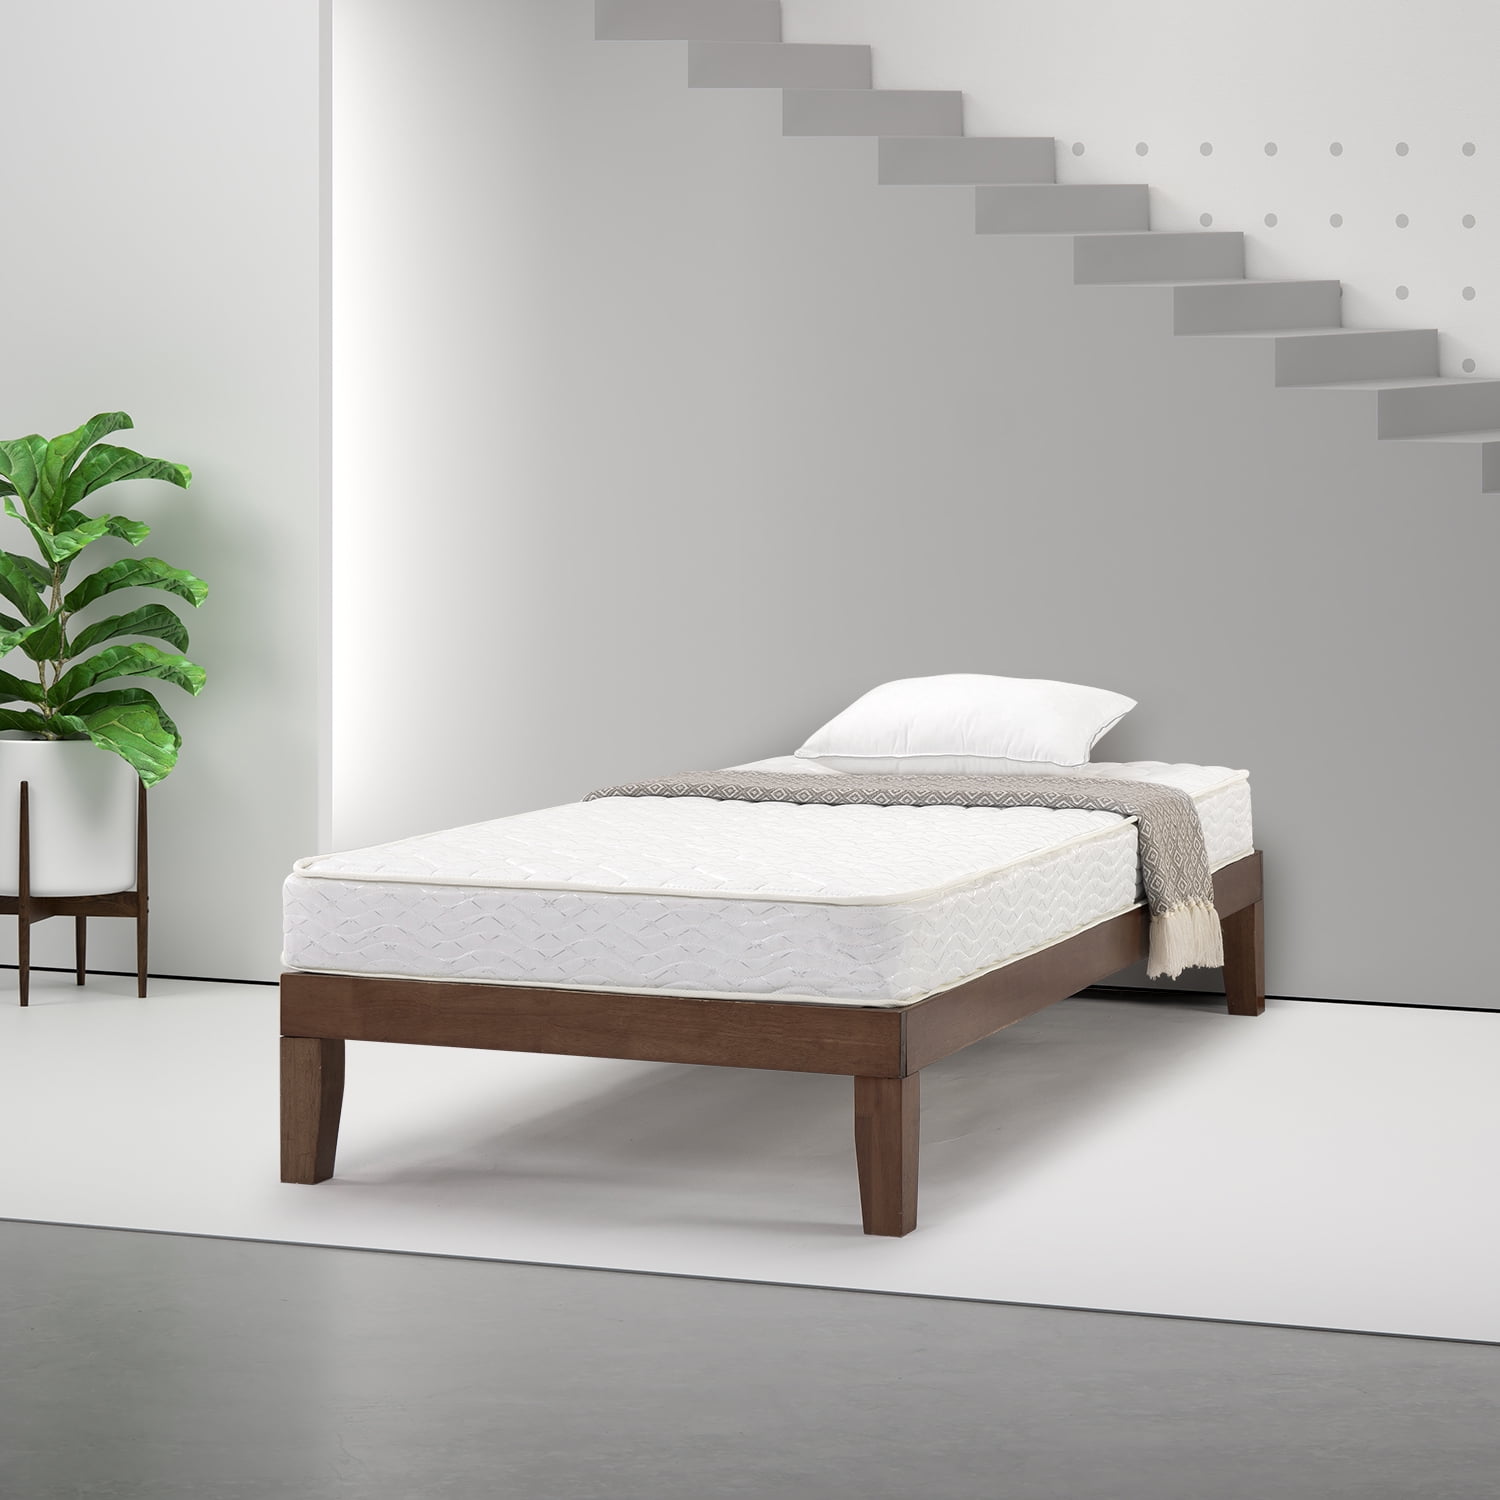 Bunk Bed Innerspring Mattress Twin, What Are The Dimensions Of A Bunk Bed Mattress